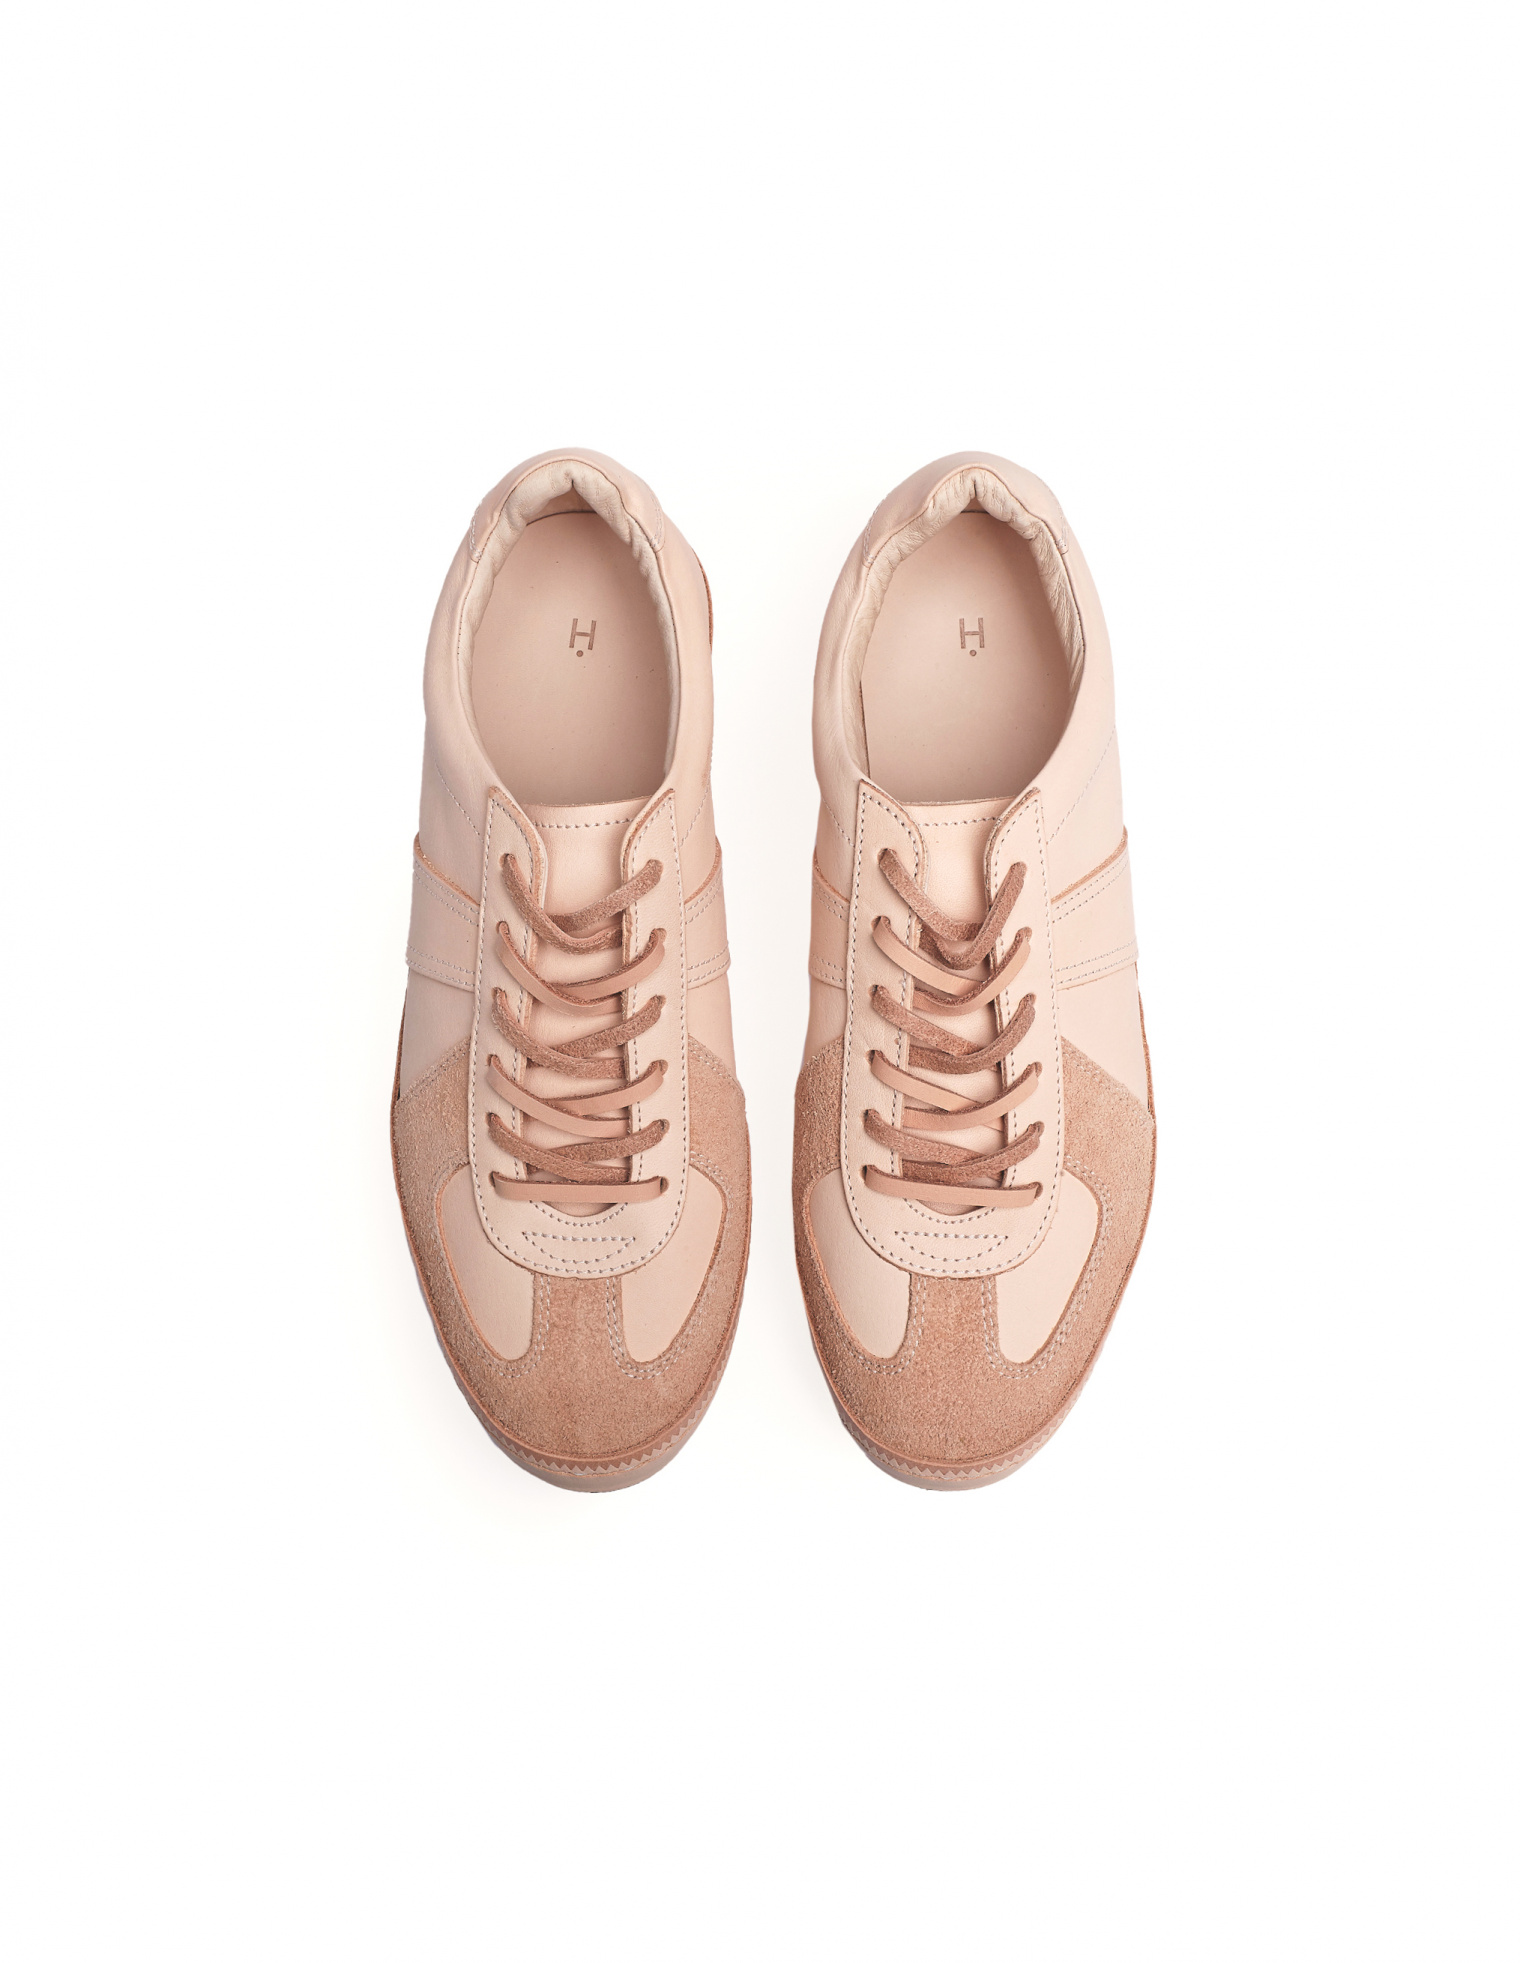 Hender Scheme Manual Indistrial Products 05 Sneakers